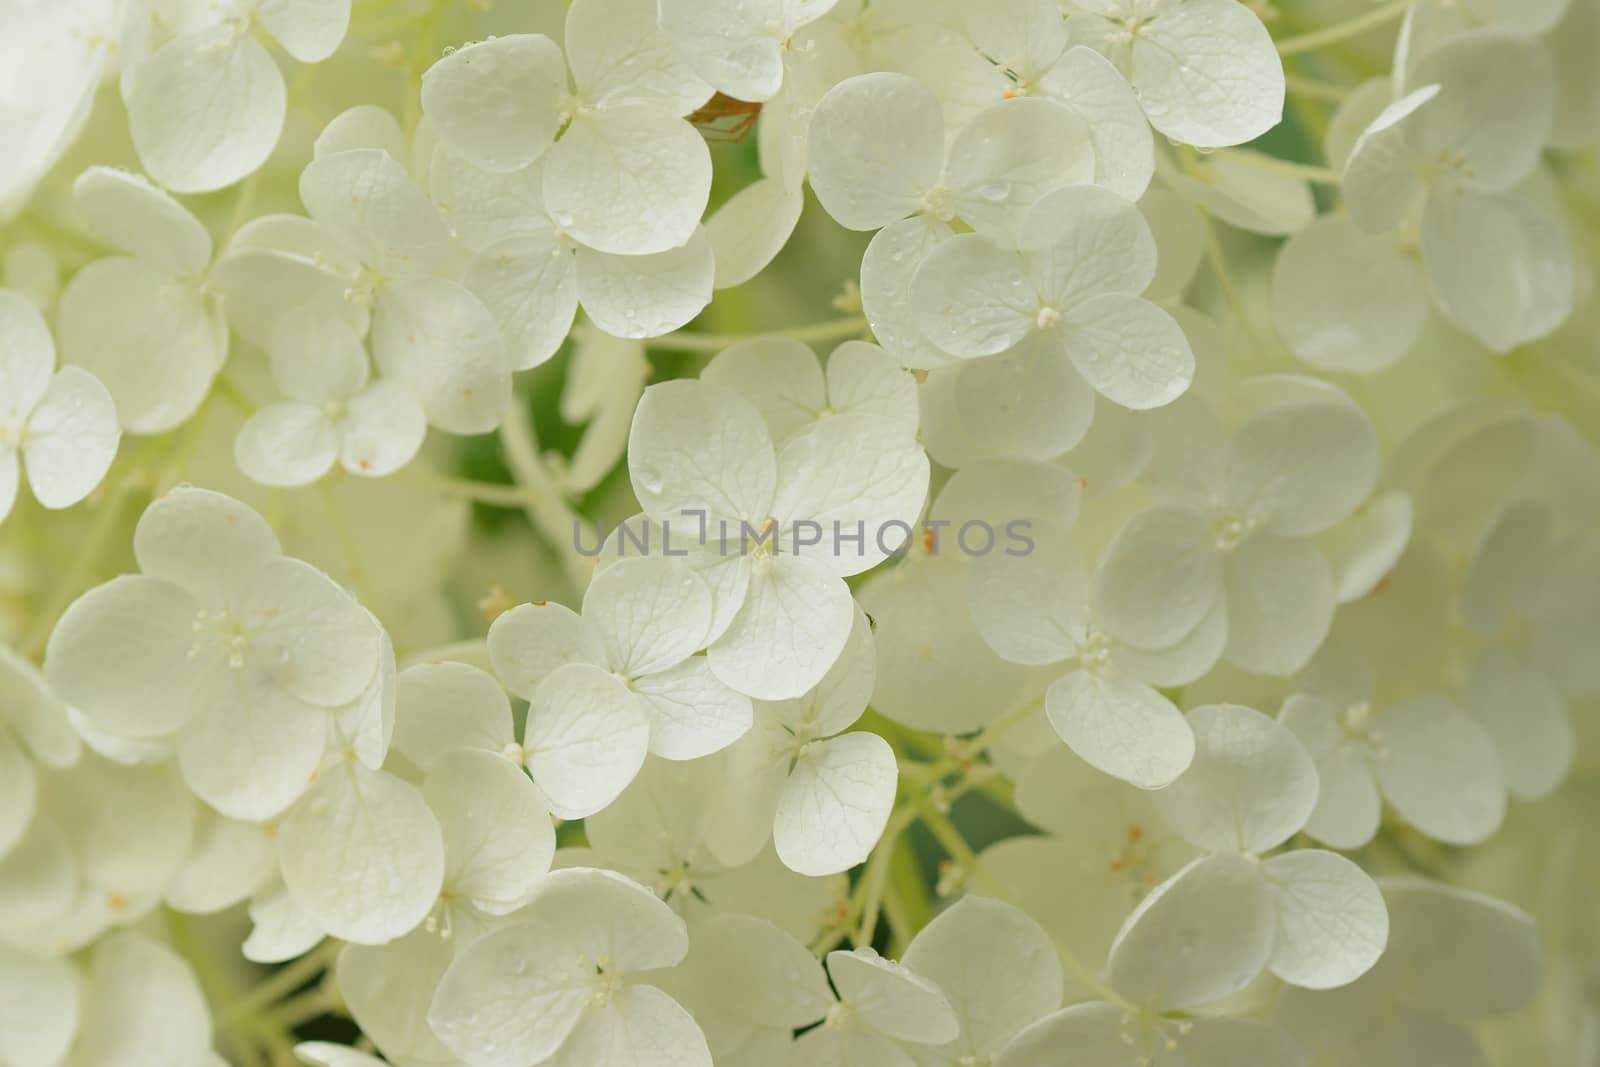 Macro texture of white colored Hydrangea flowers with water droplets by shubhashish